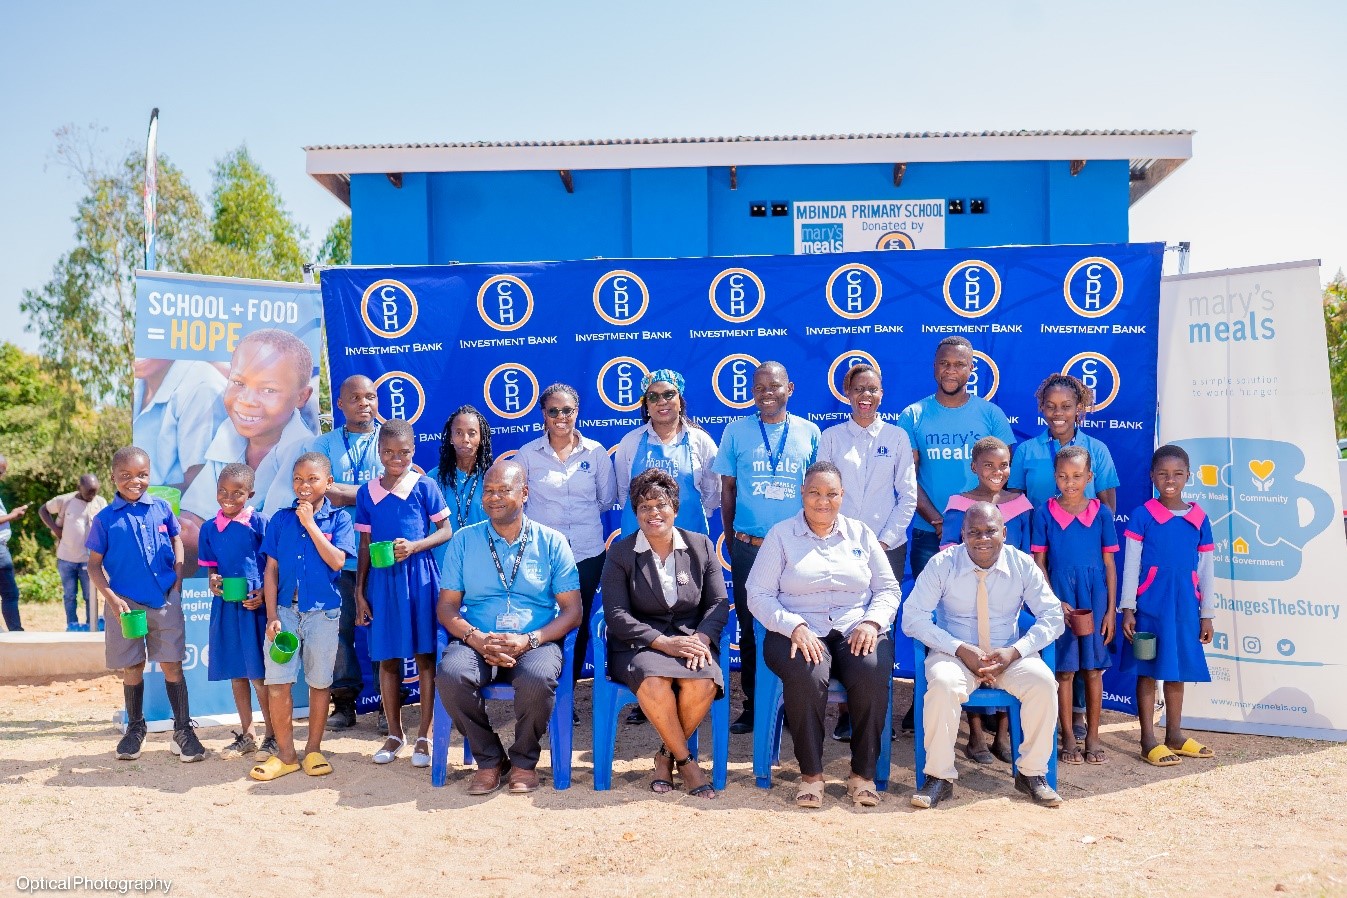 The head teacher and some learners from Mbinda Junior Primary School, some Mary’s Meals Malawi and CDH Investment Bank representatives pose with the Guest of Honor, Zelita Zamula, Ministry of Education Principal Education Officer in front of the new school kitchen and feeding block.